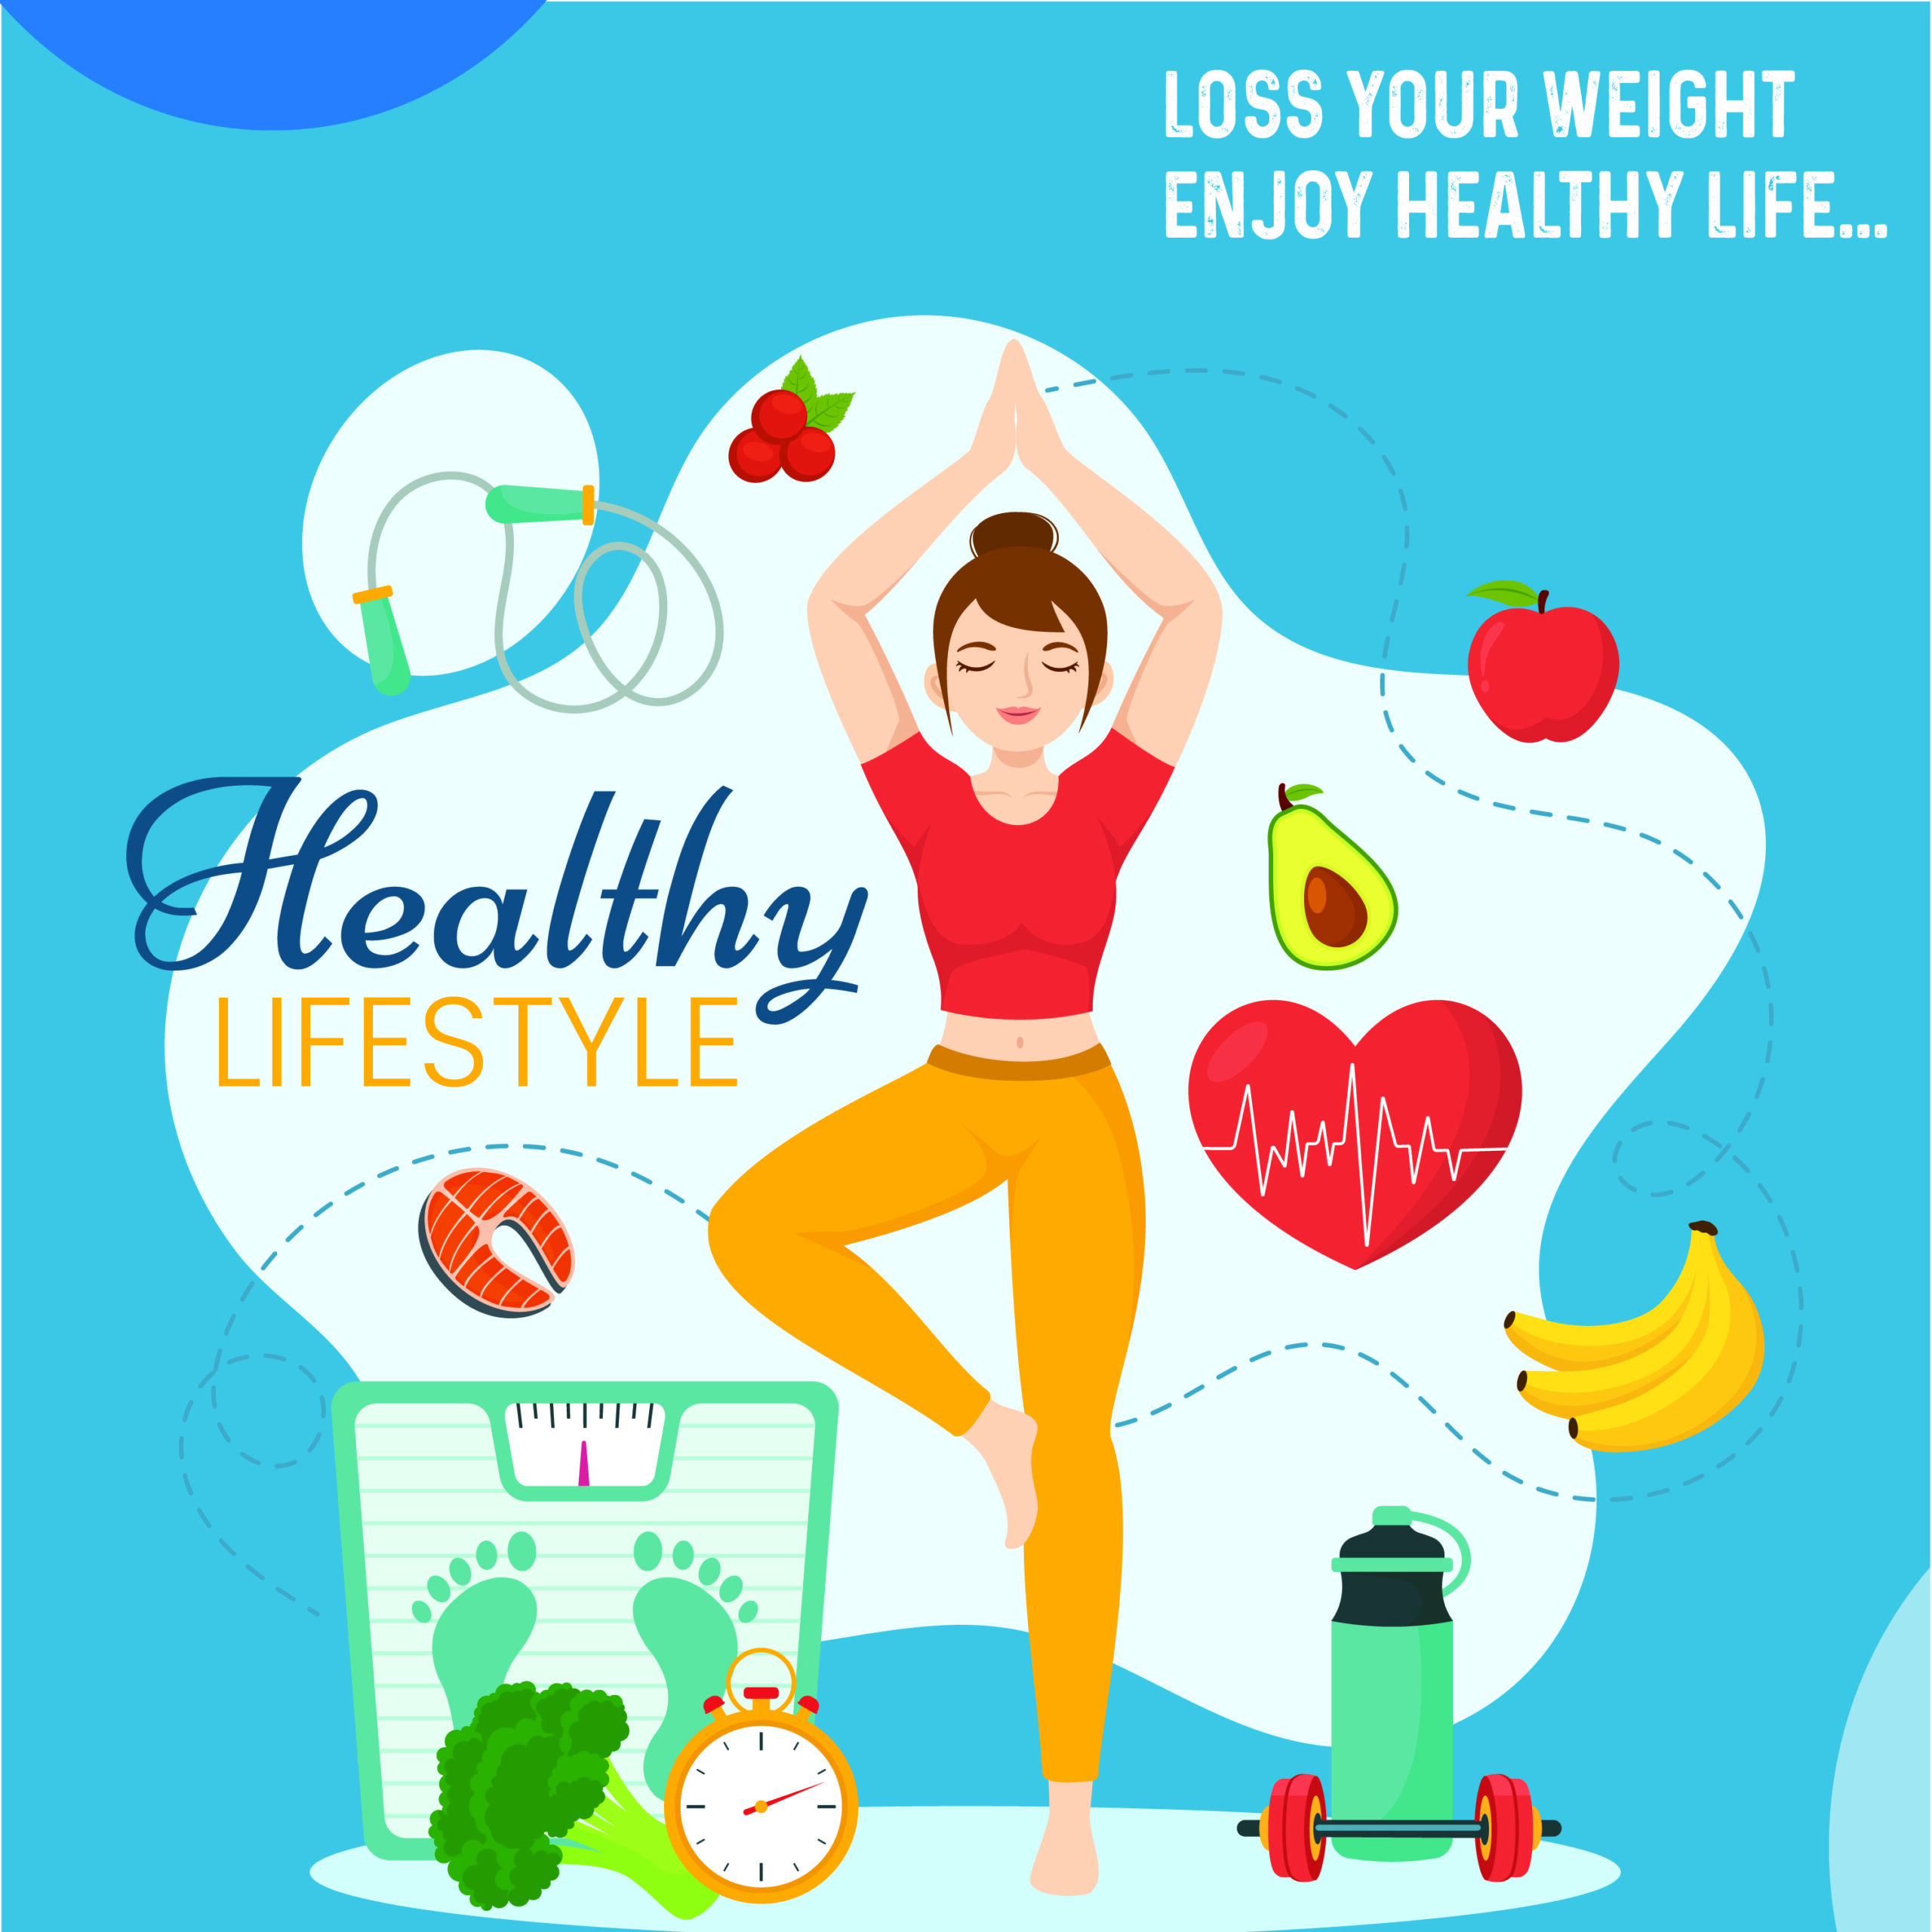 Lose Your Weight Enjoy Healthy Life